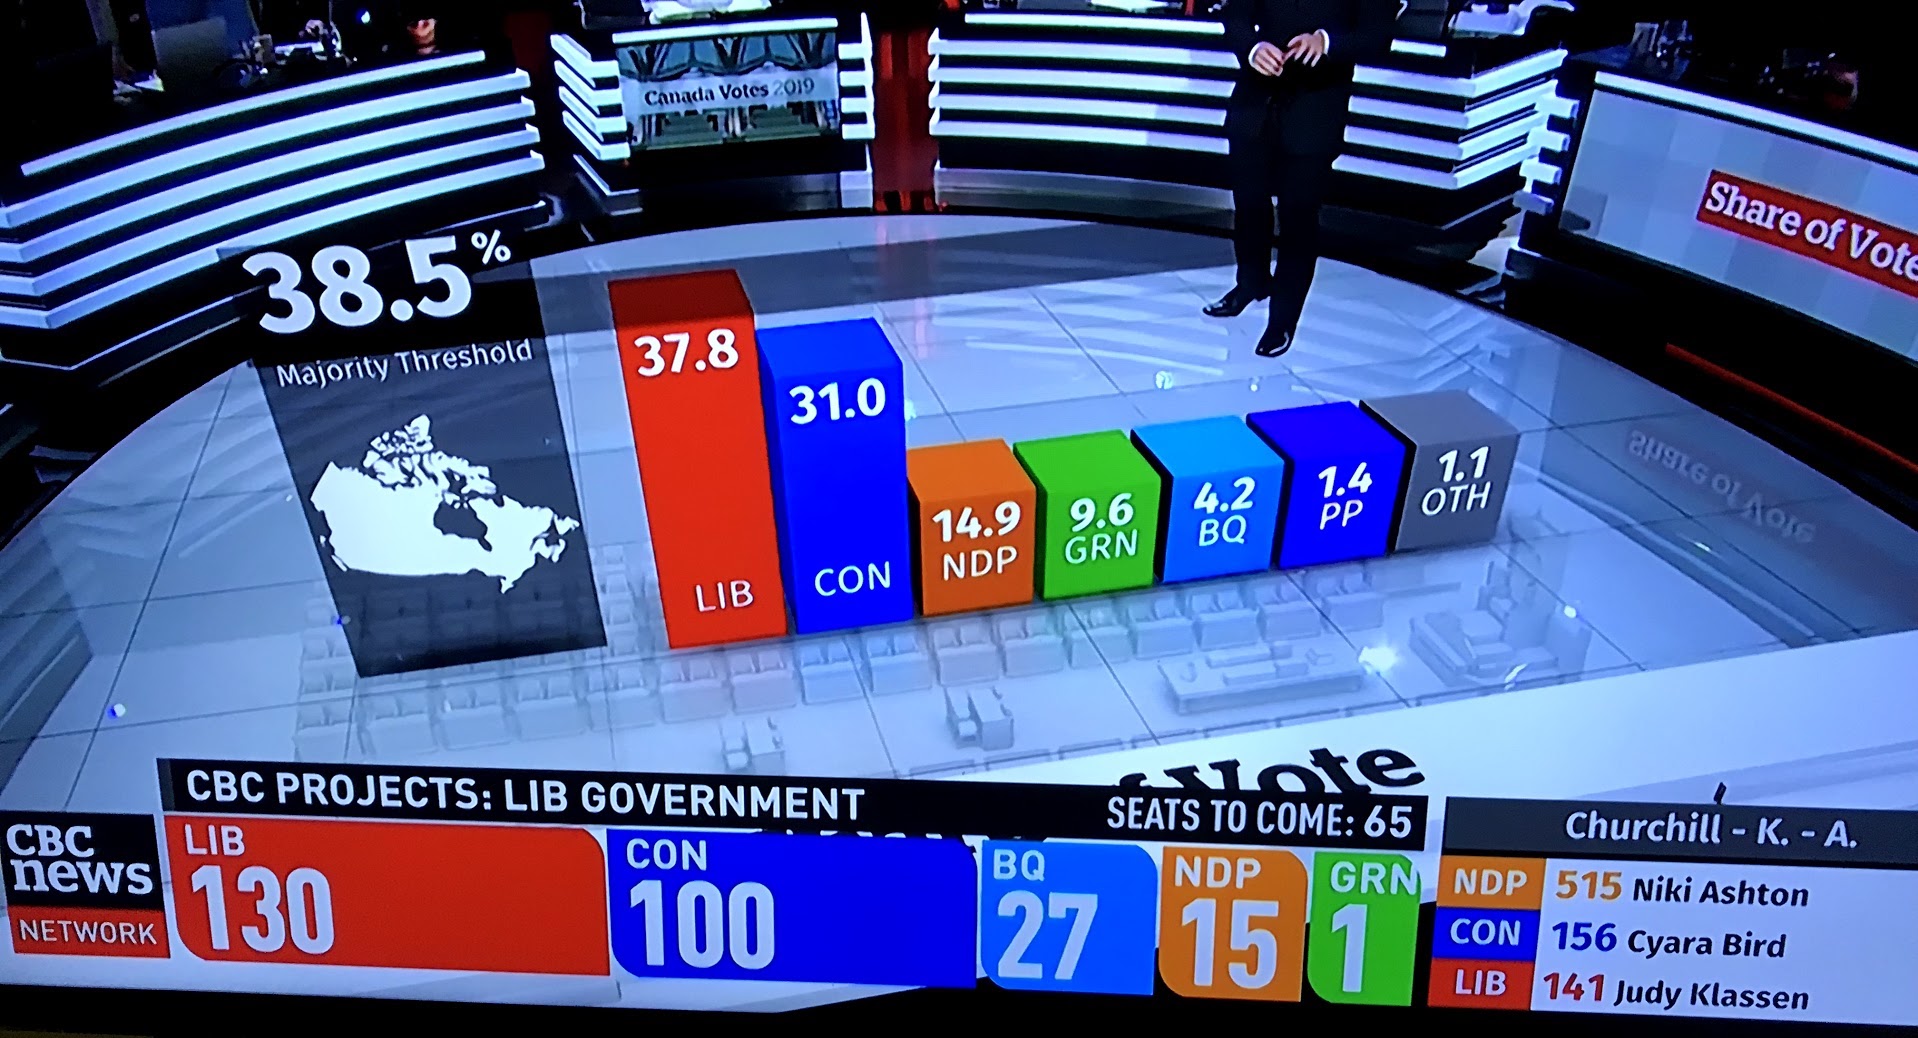 Still from CBC Canadian Federal election coverage, October 21, 2019. Does the three-dimensional bar chart help you understand the election outcome? Are the bars the right height? Is it helpful to have the bar chart appear in the middle of the studio set? Can you judge the height of the bars?